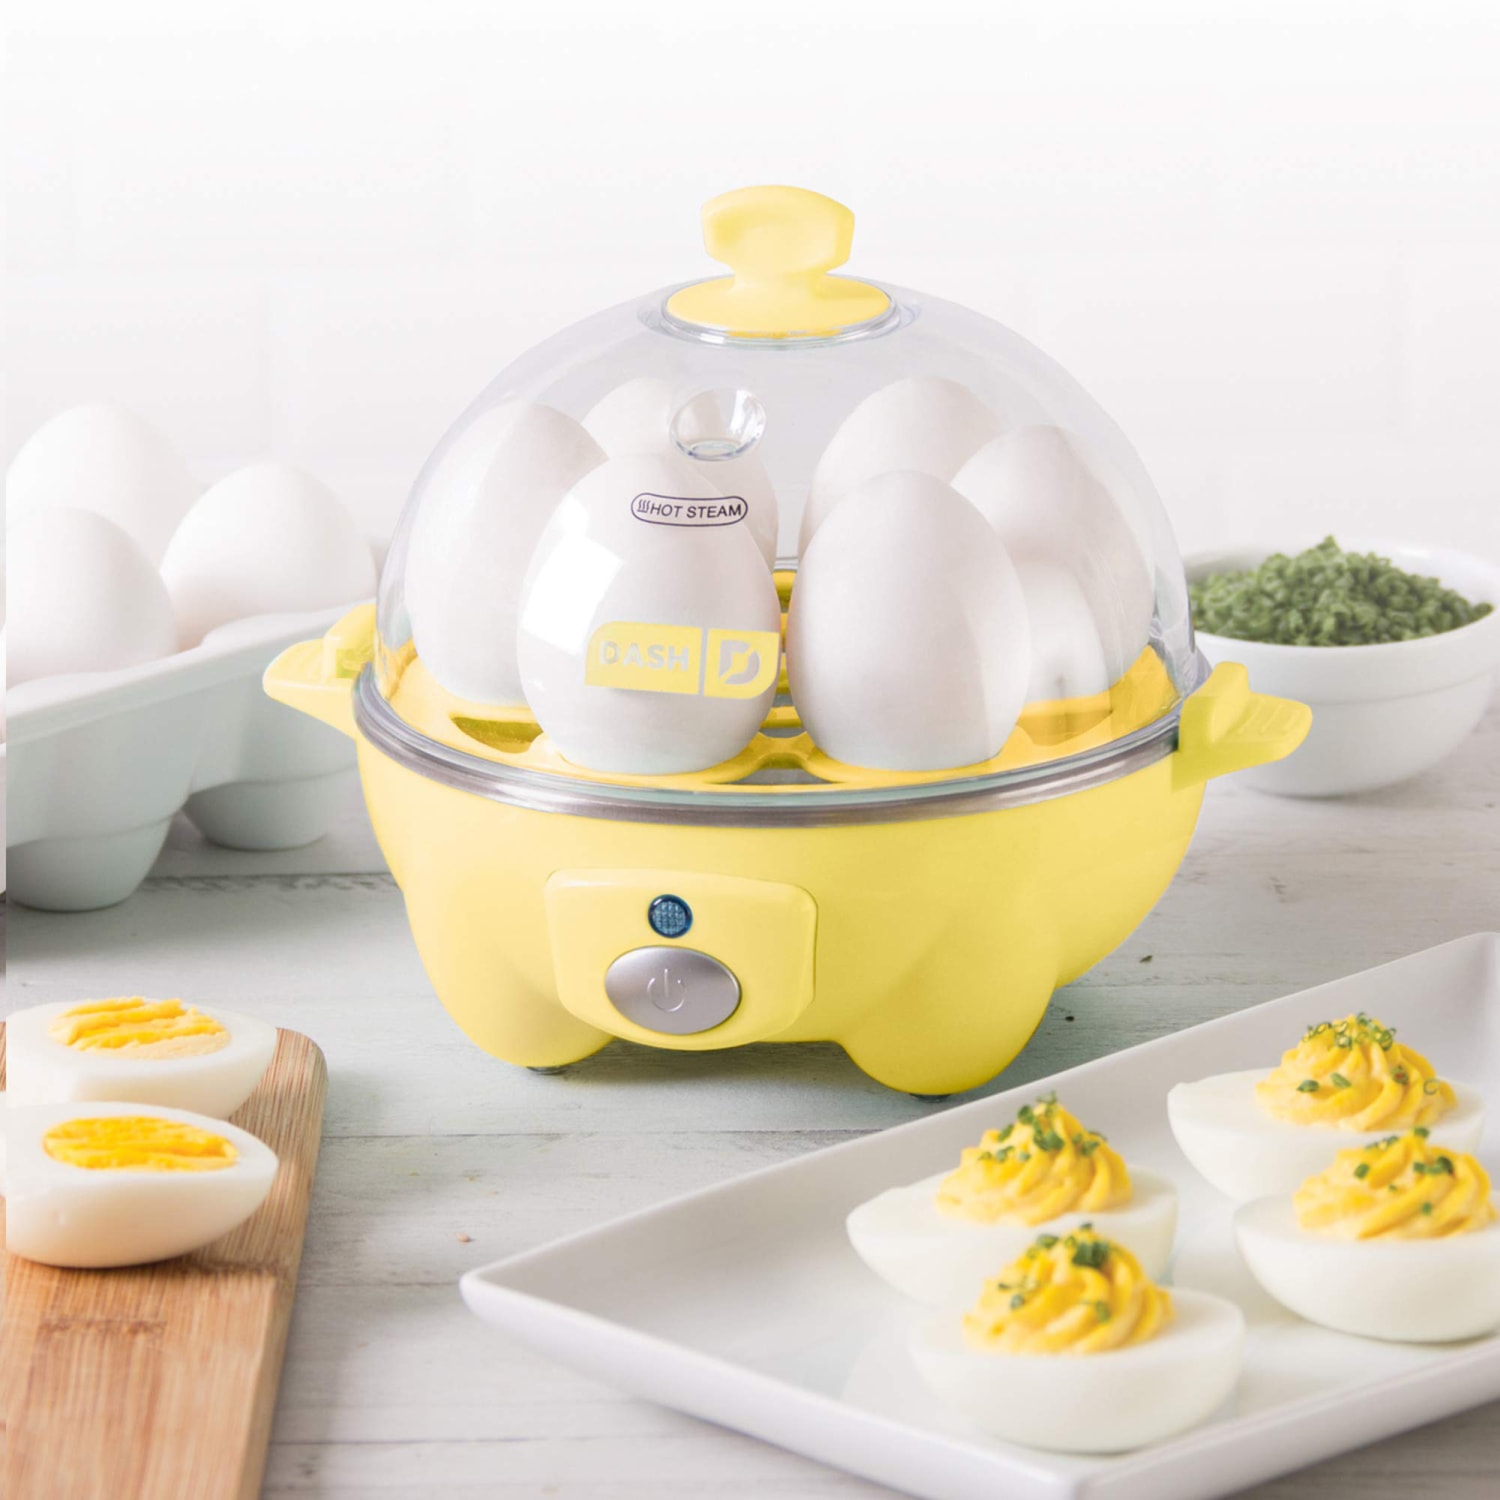 Best Egg Cookers [Tested. Reviewed. Ranked]